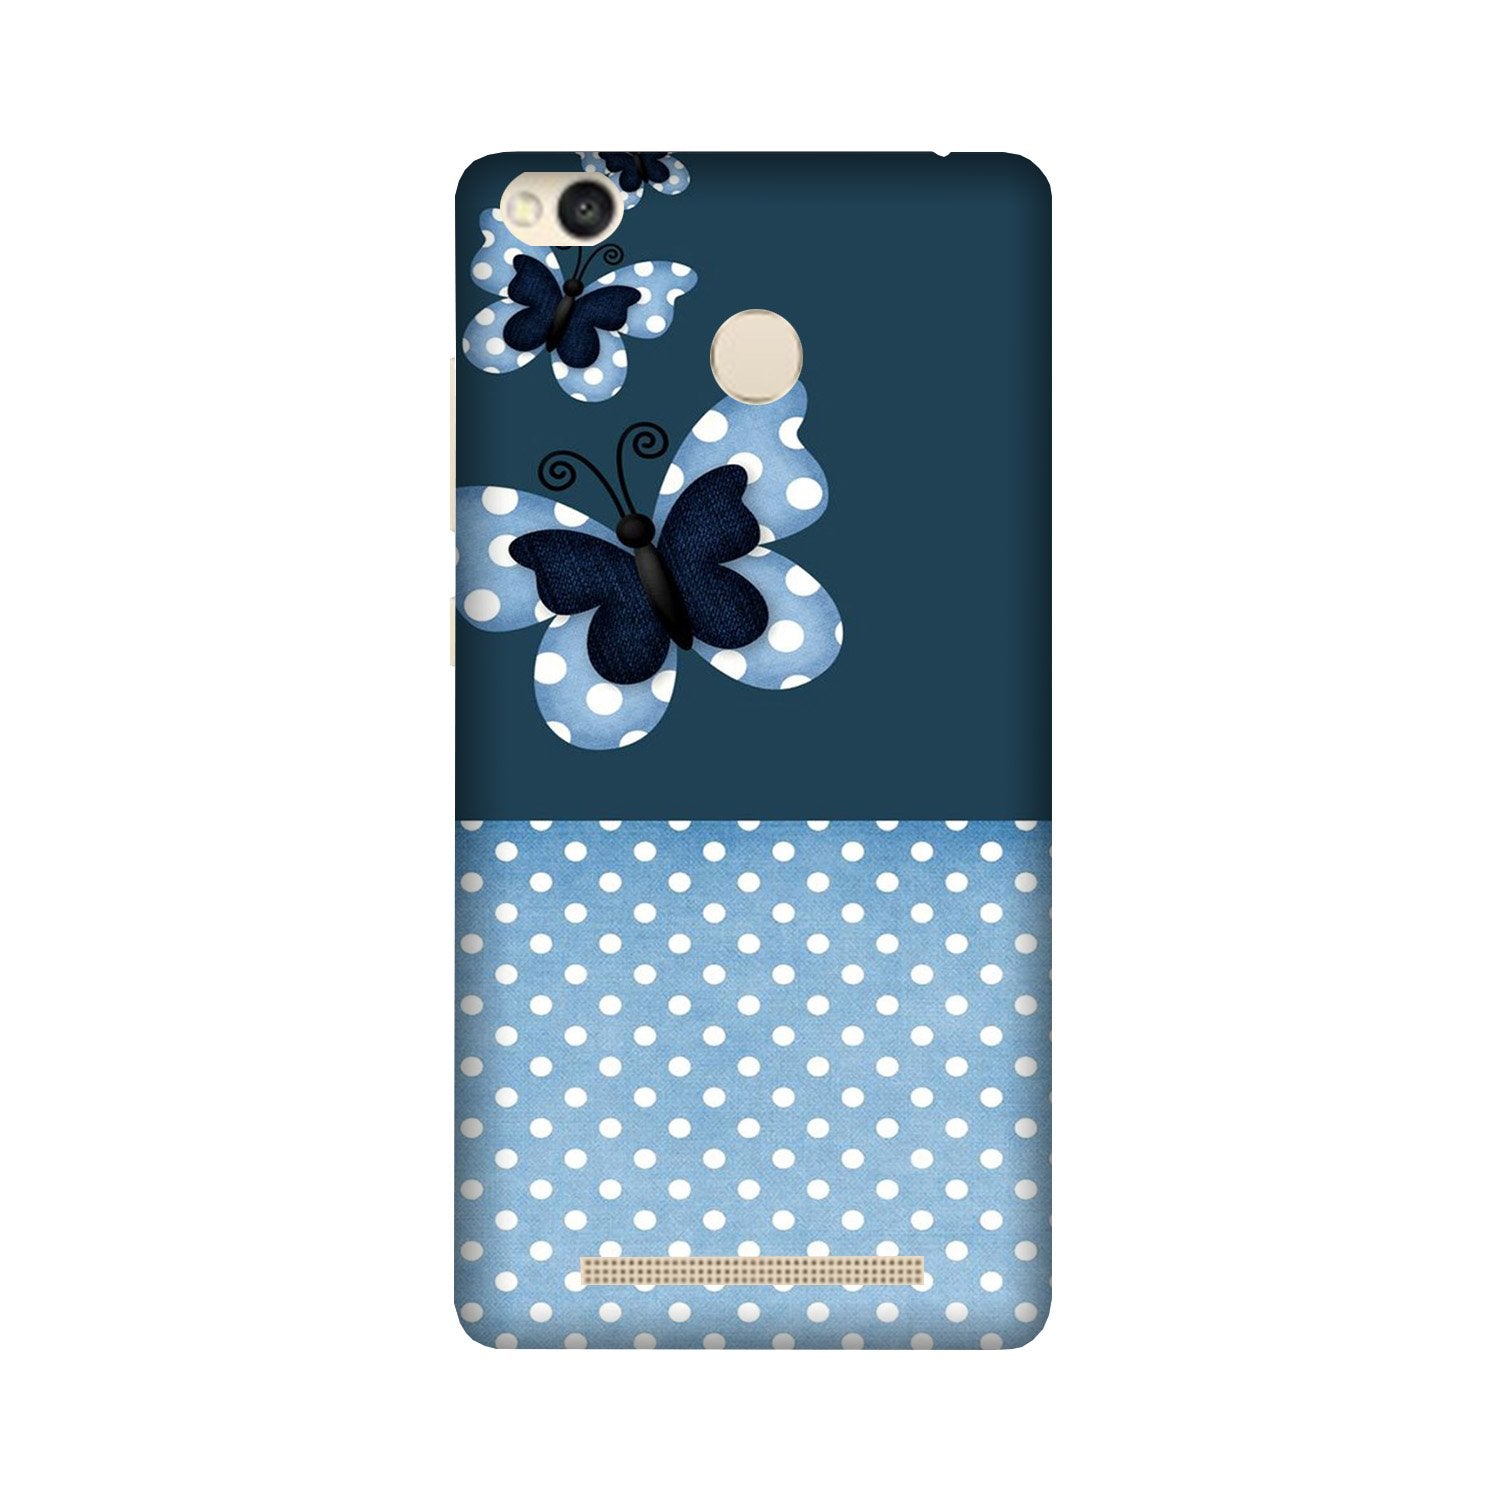 White dots Butterfly Case for Redmi 3S Prime